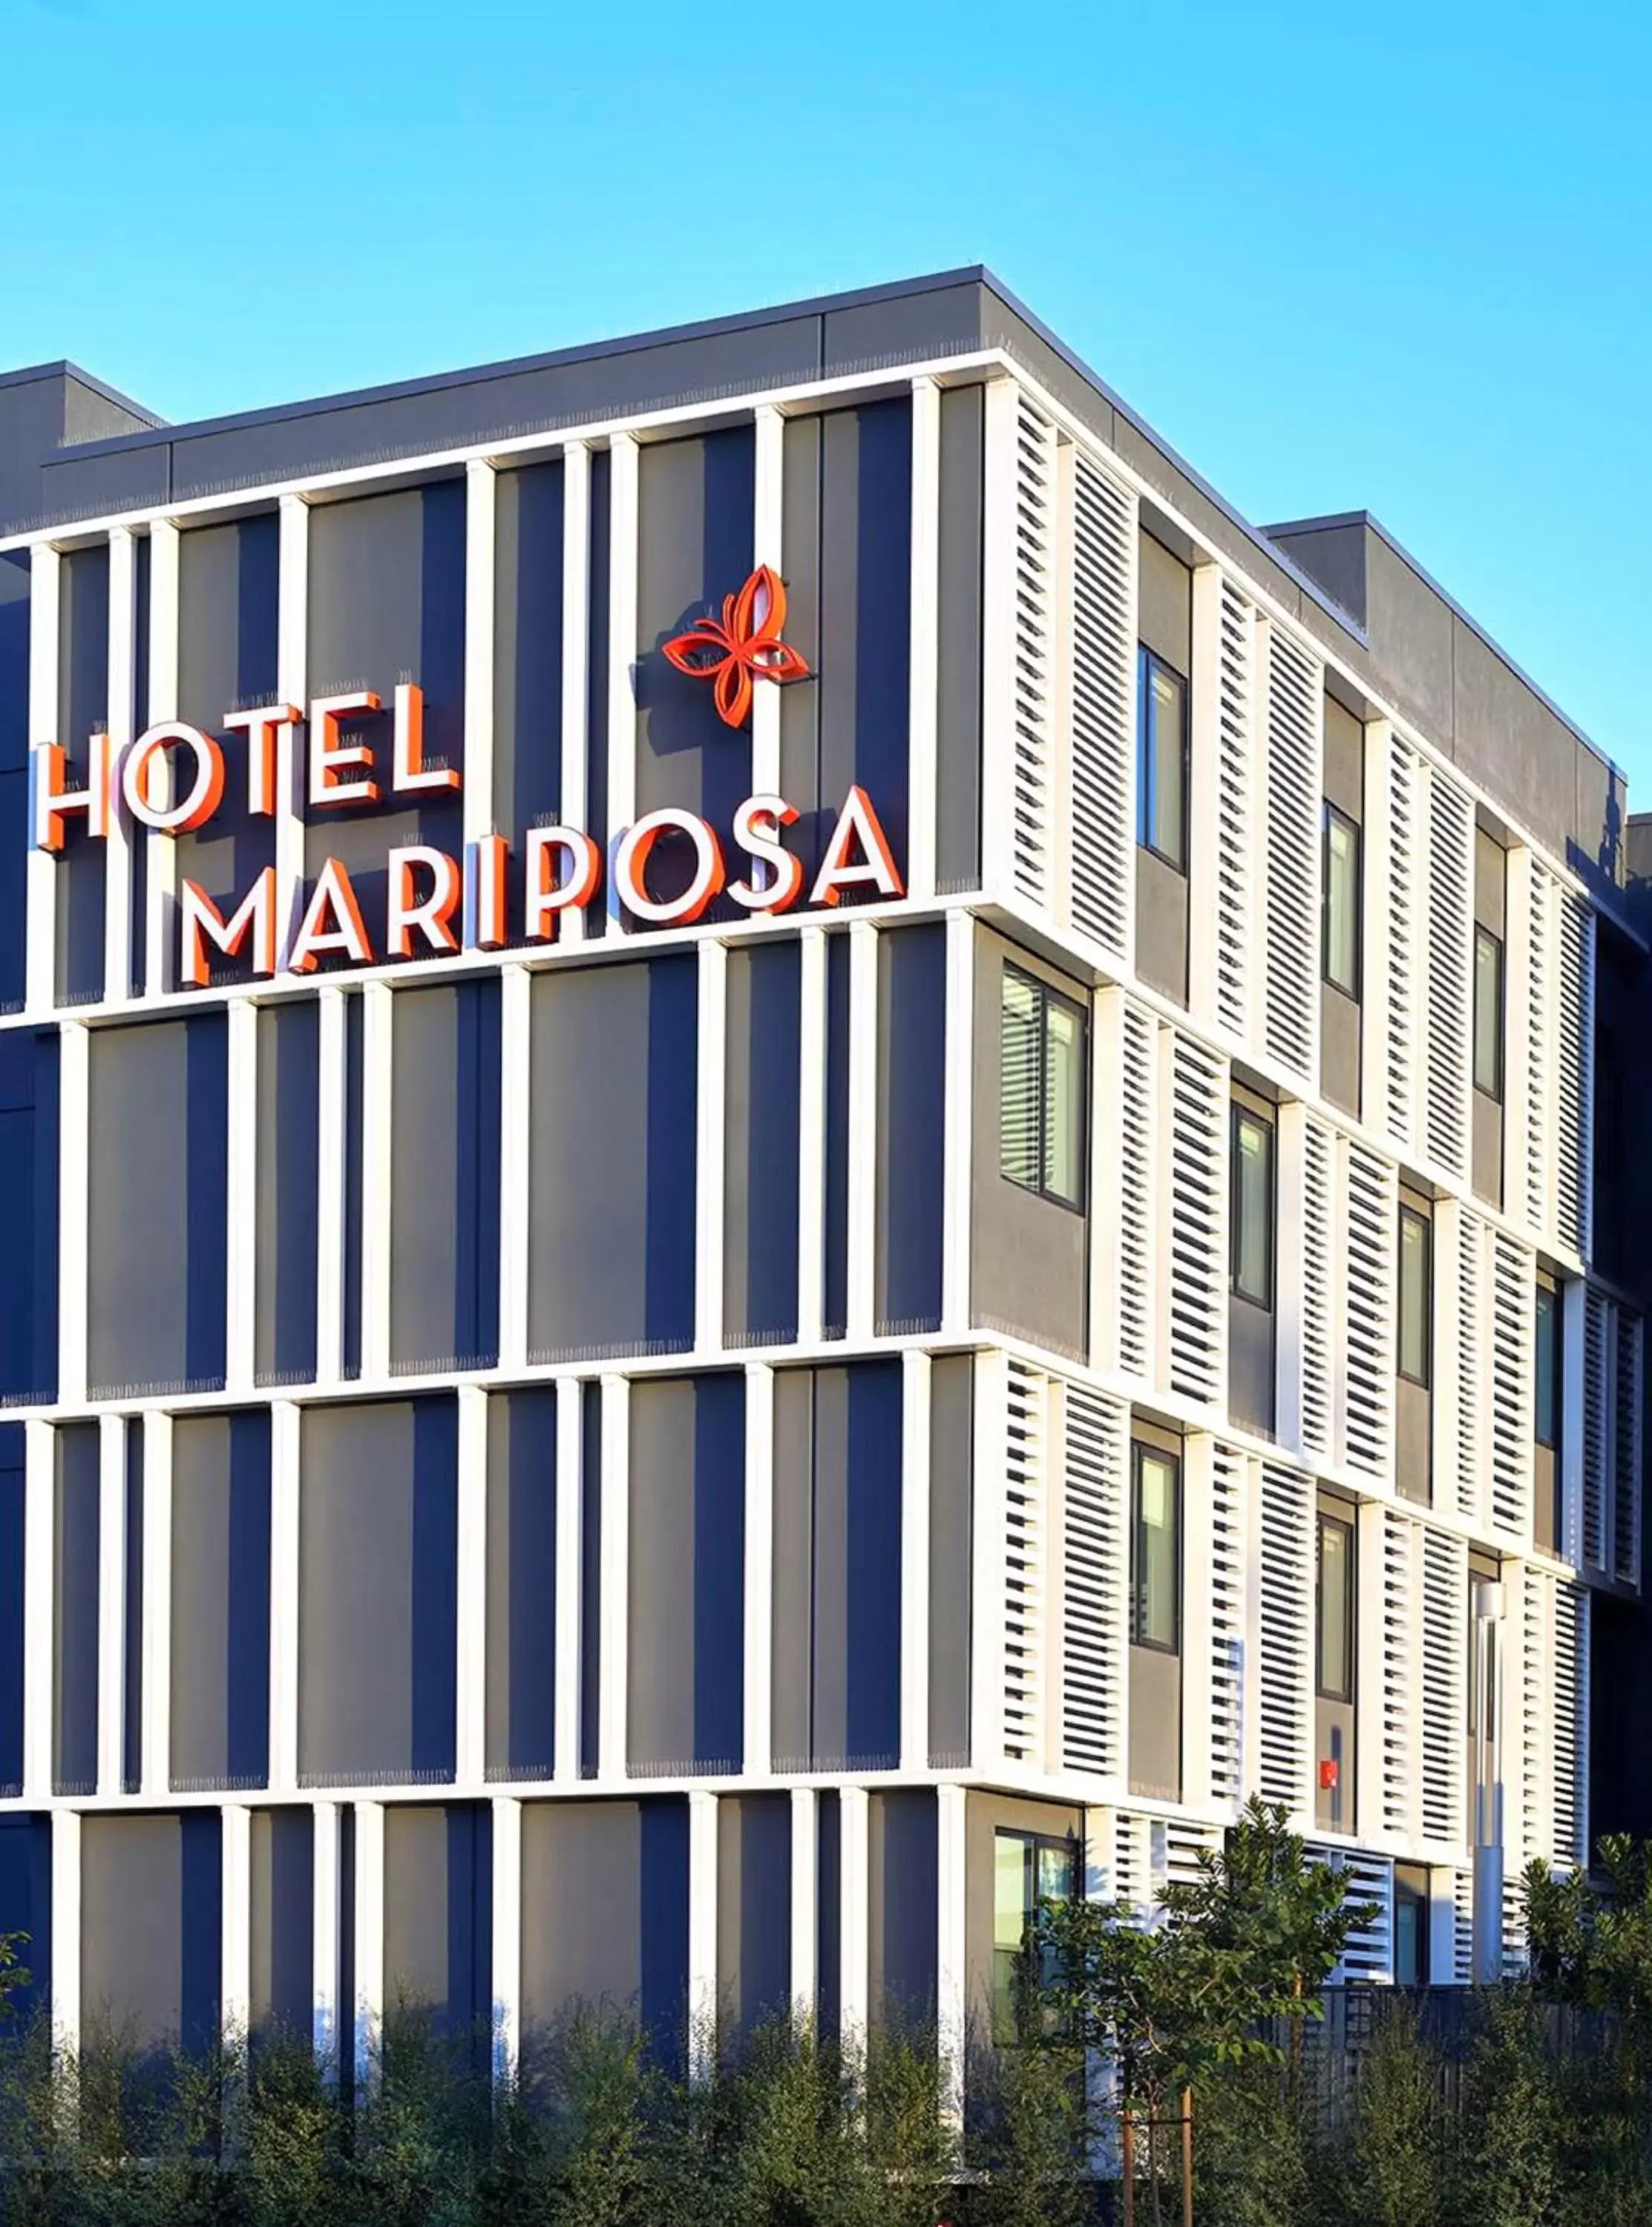 Property Building in Hotel Mariposa